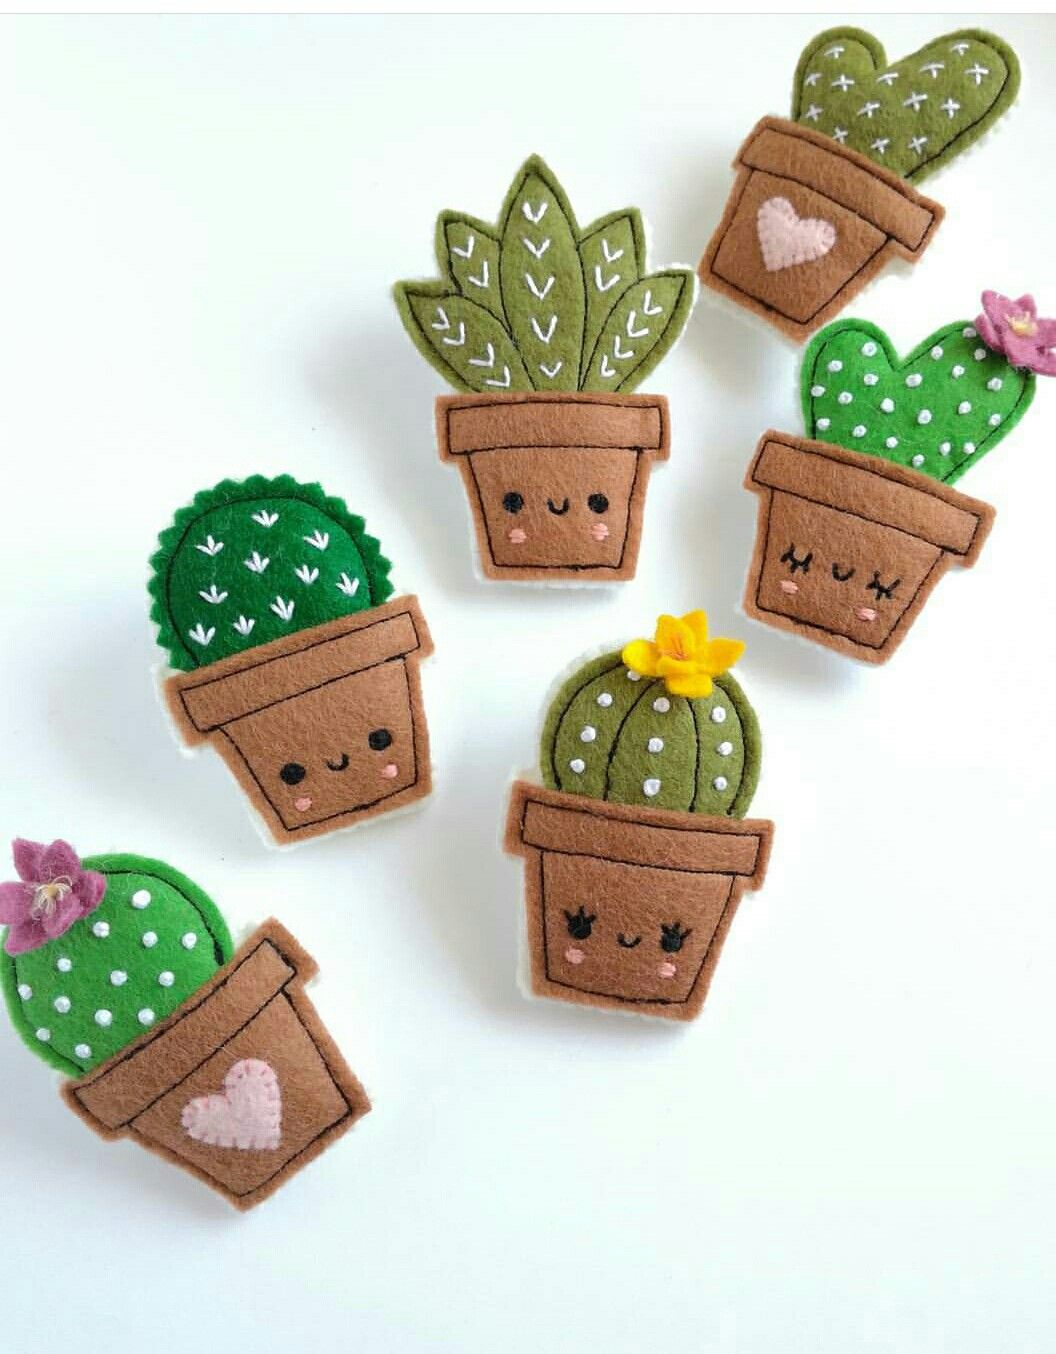 Pictures of hand-sewn felt succulents